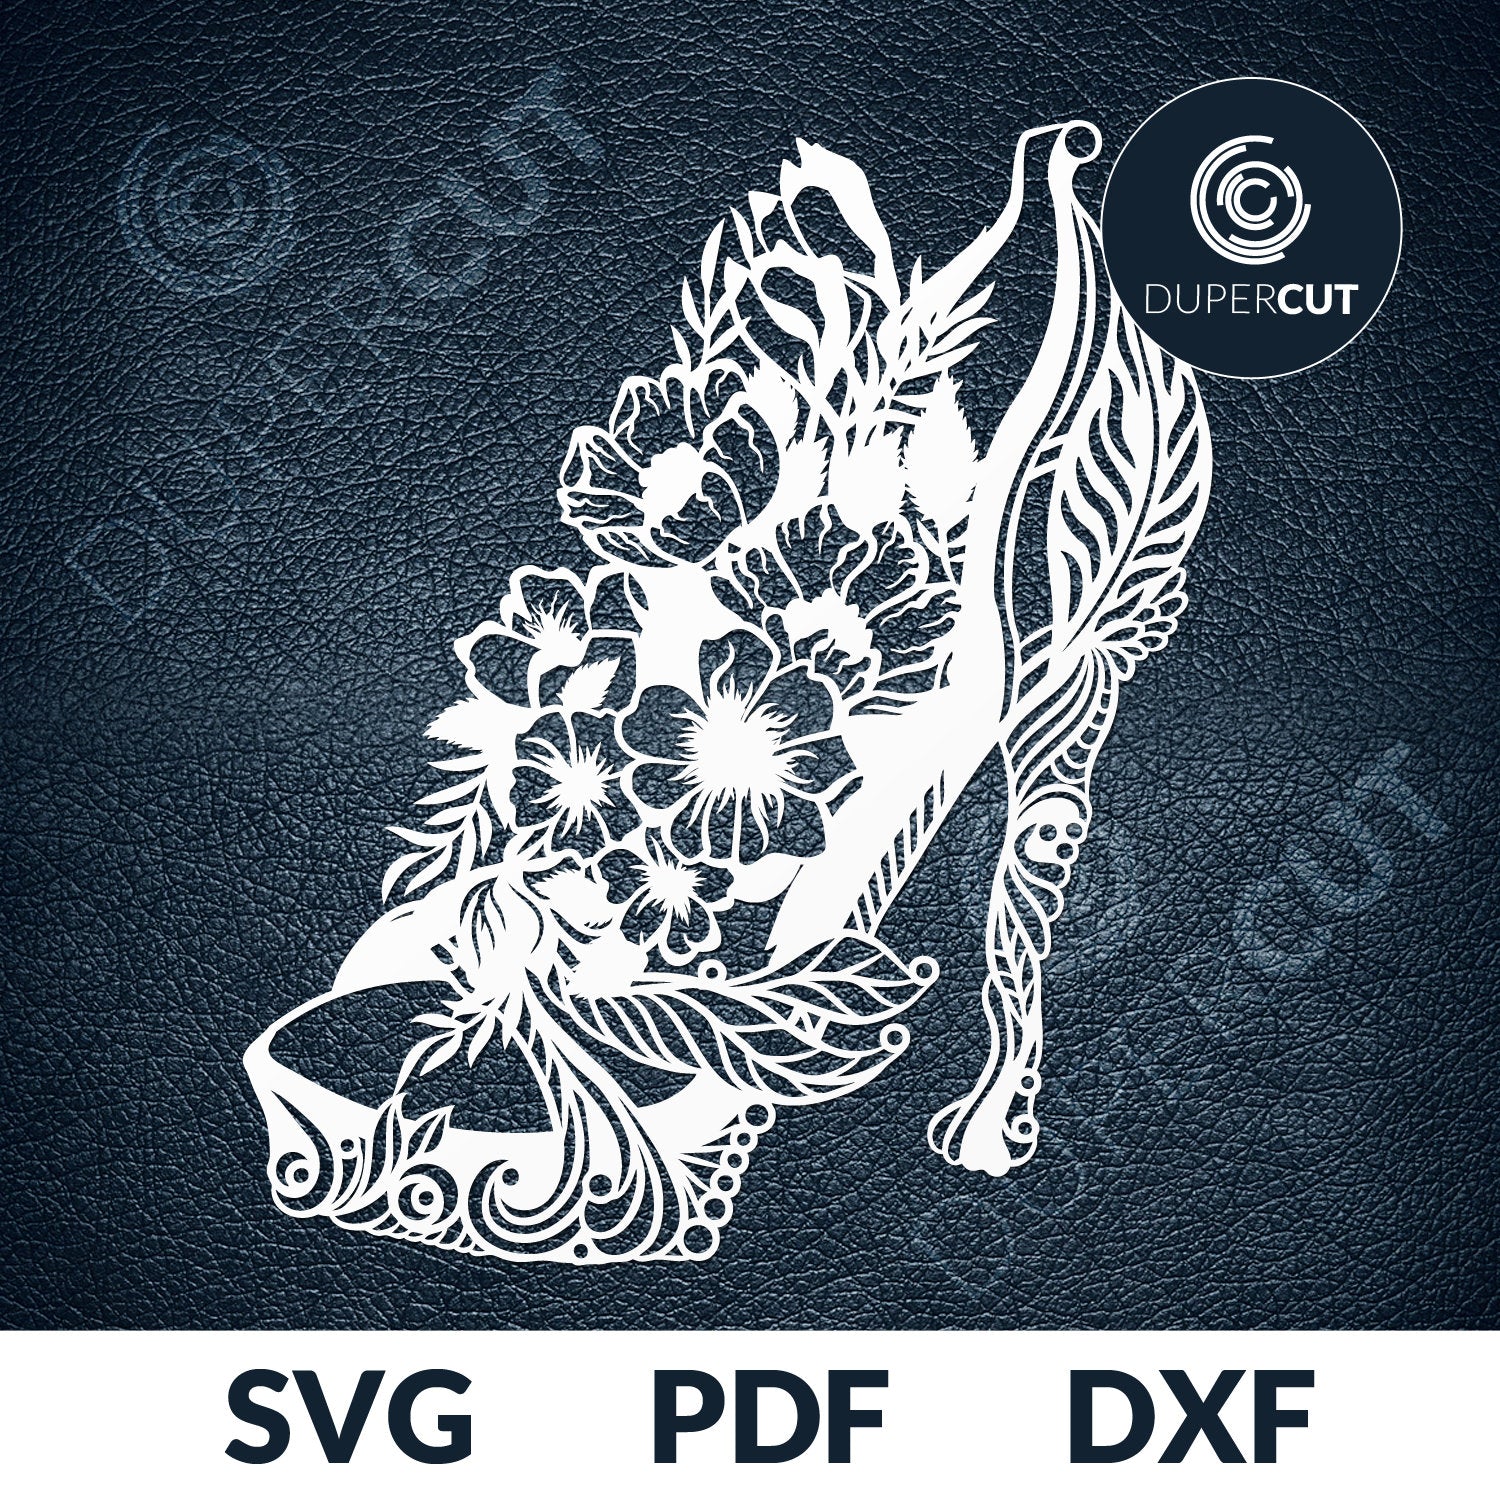 Paper cutting template - High heels with flowers. - SVG PNG DXF files for cutting machines: Cricut, Silhouette Cameo, Glowforge, CNC laser